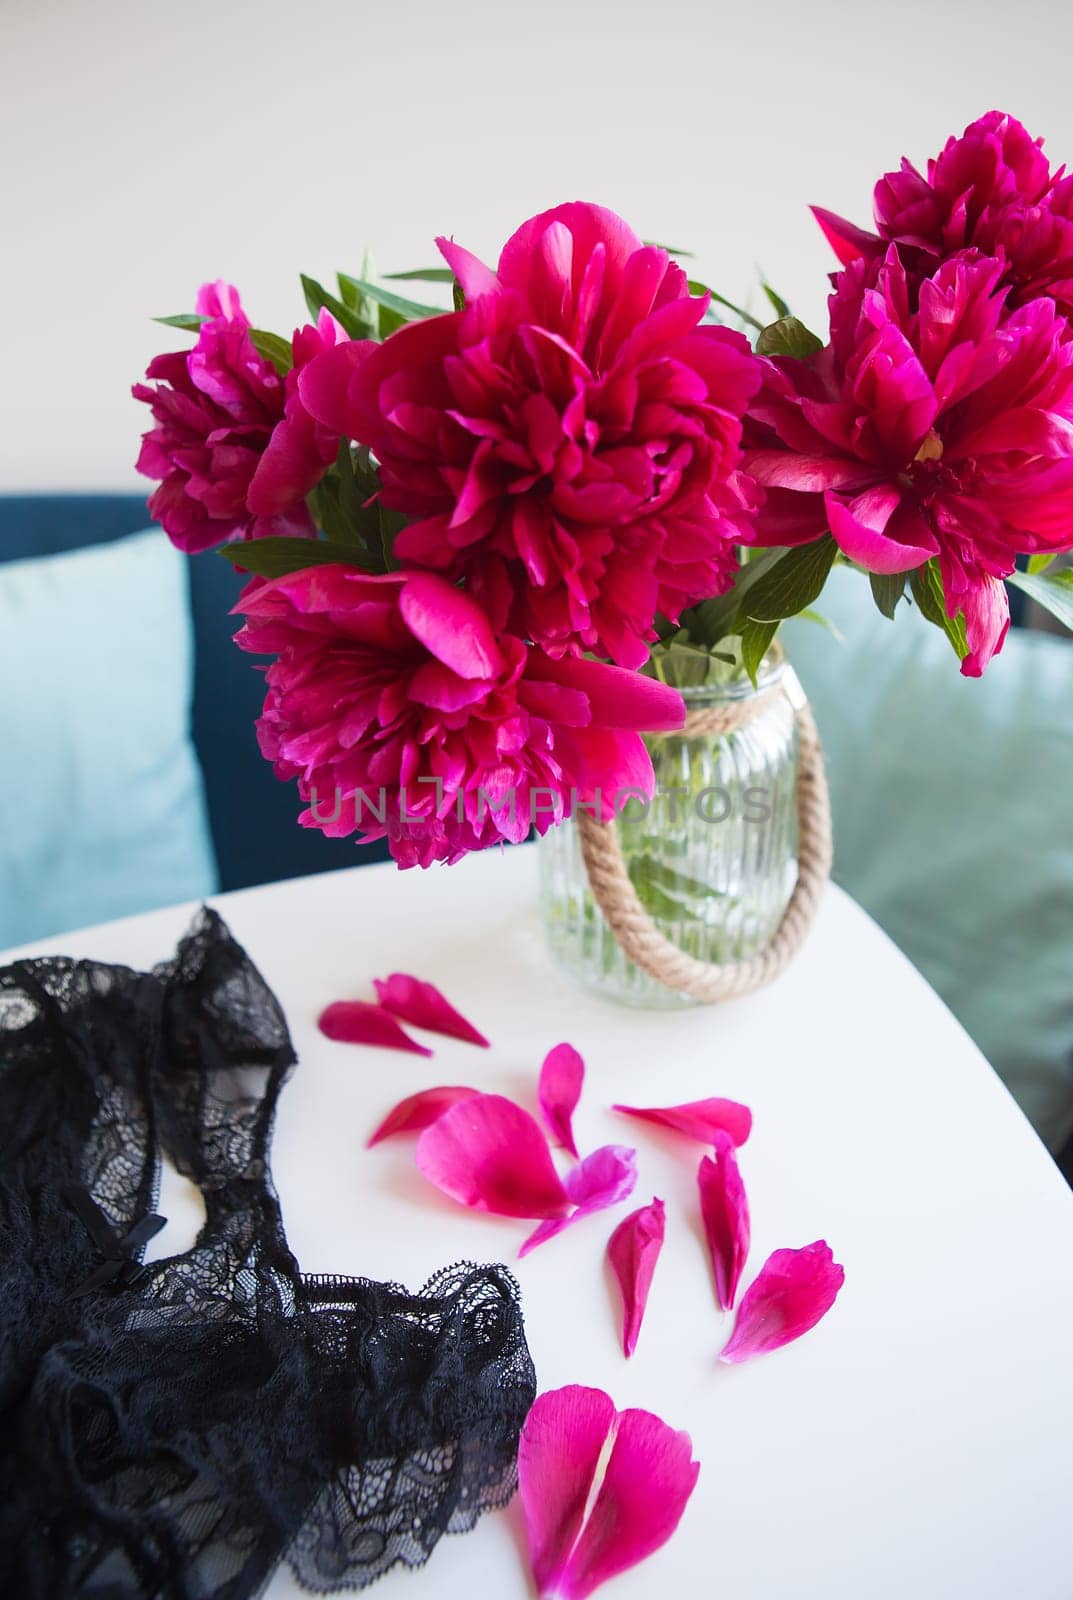 beautiful pink peonies near the window, petals crumble on the table, lace underwear.